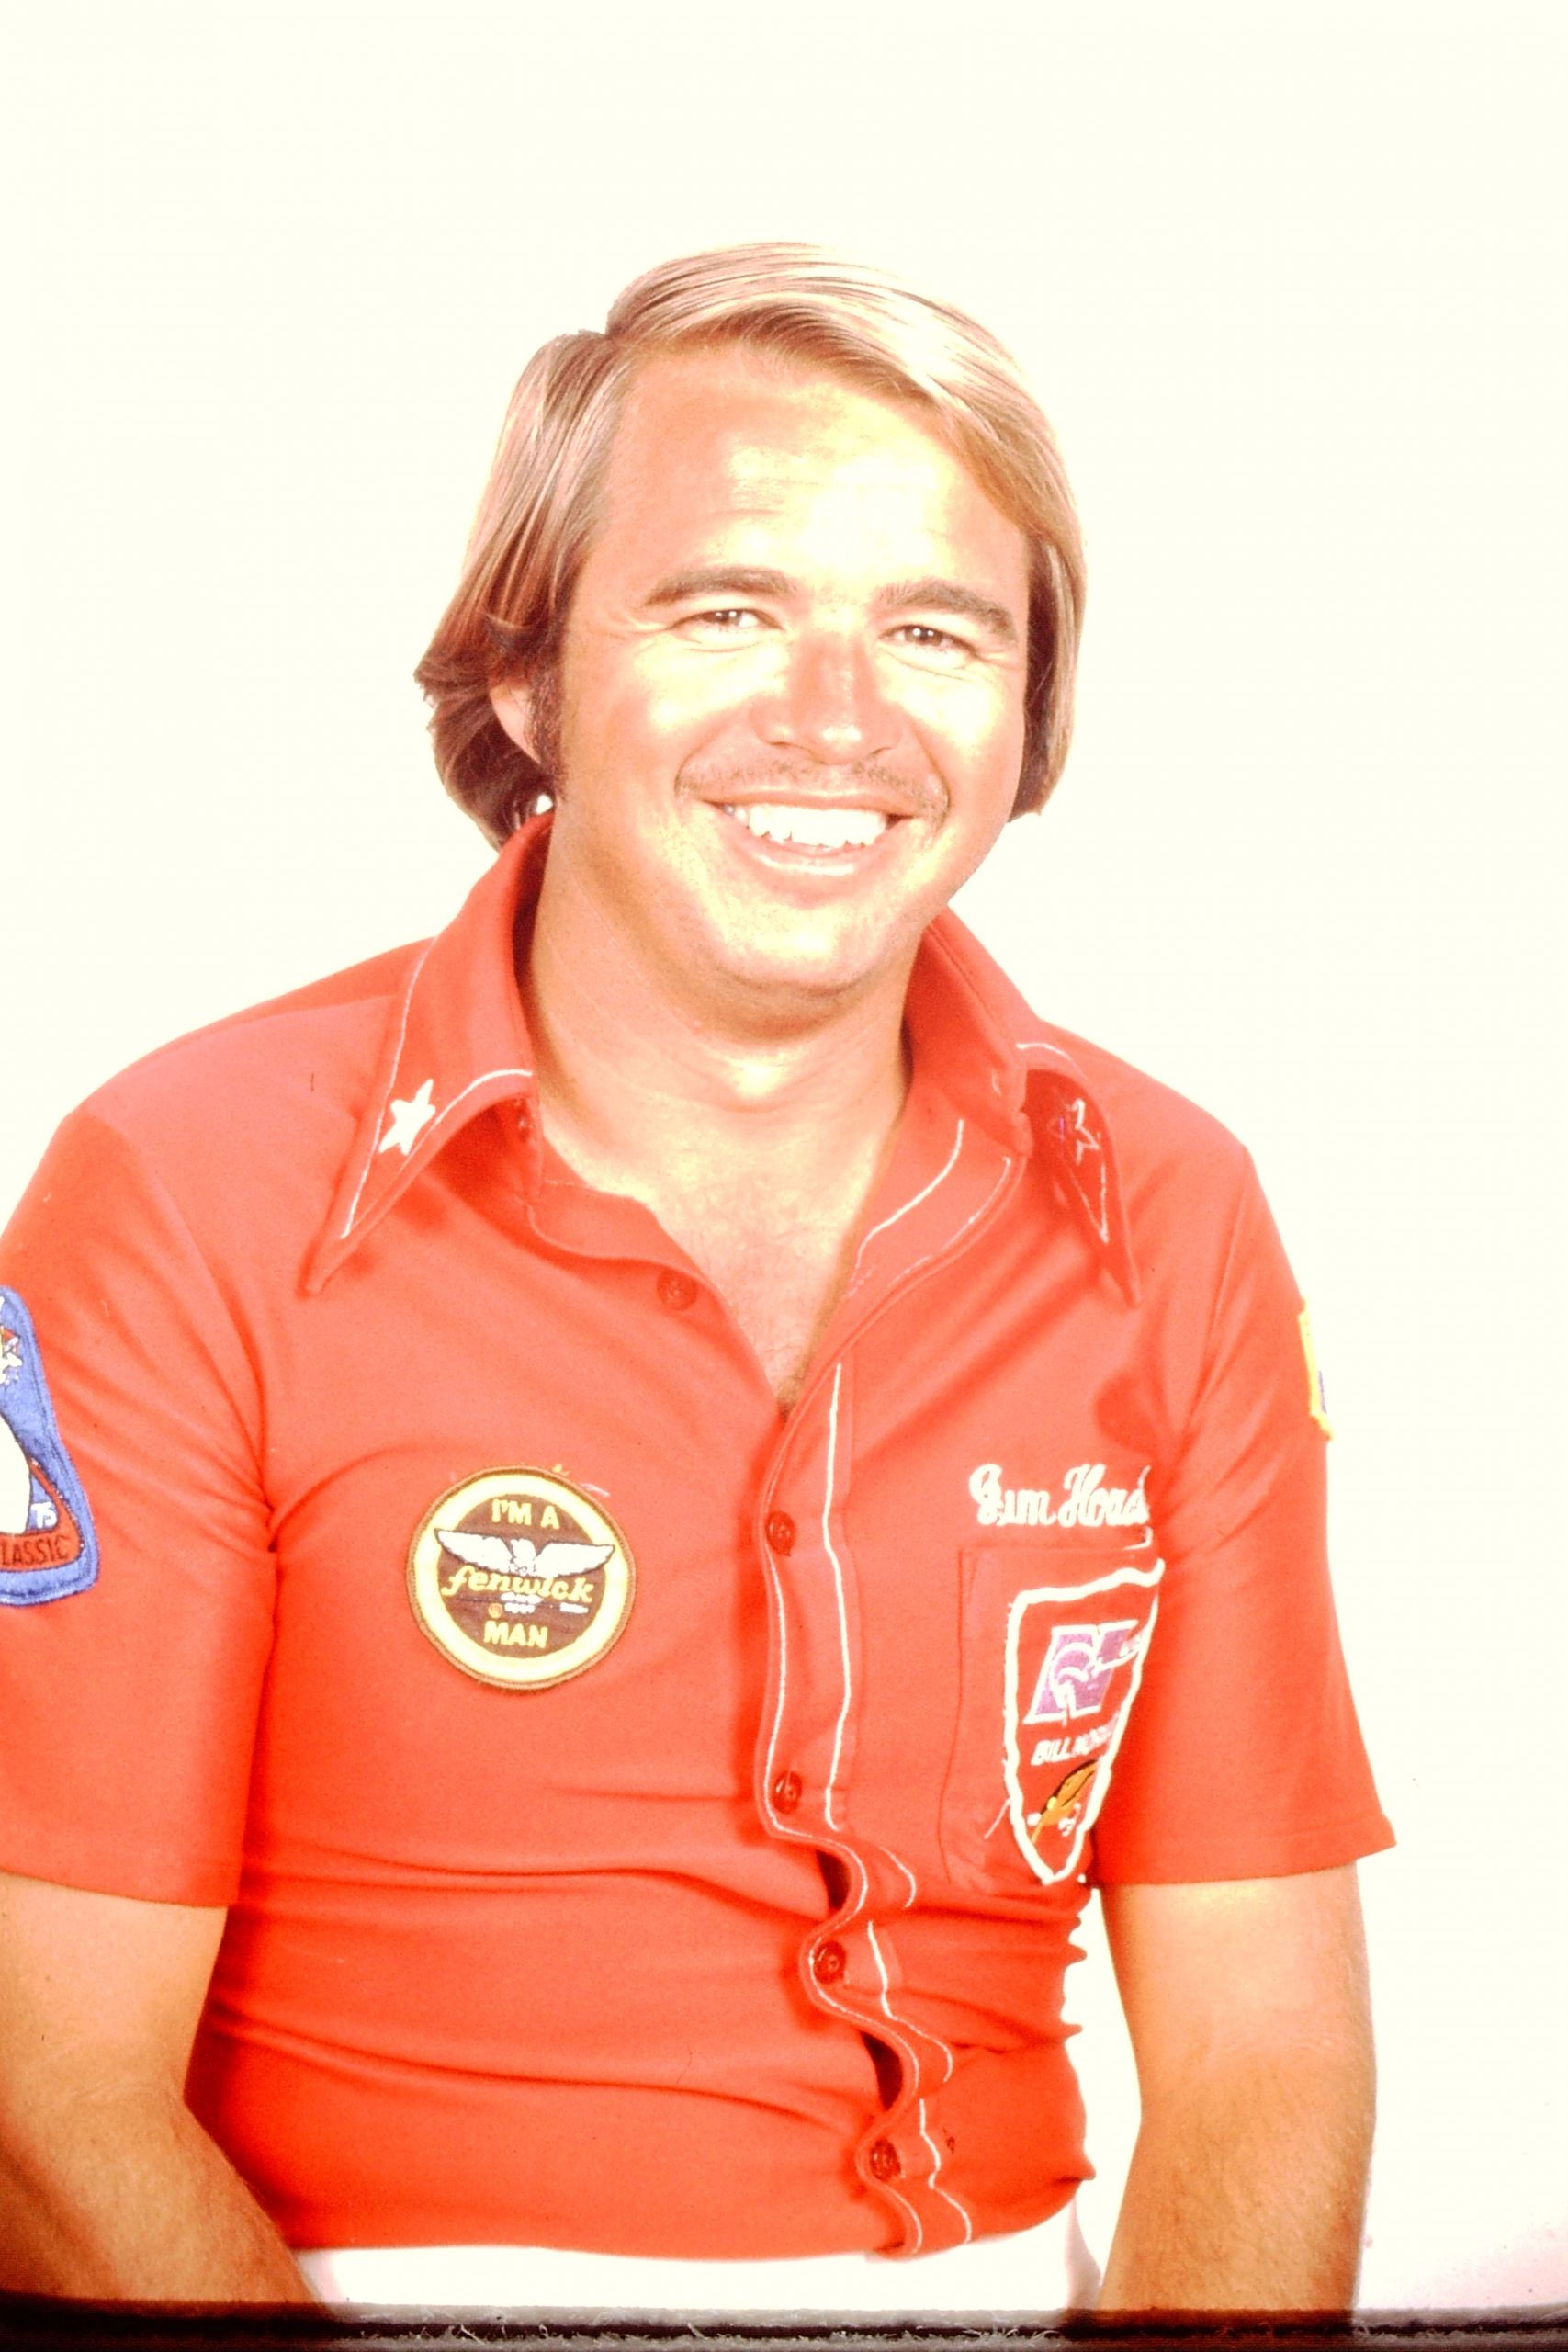 <b>1976</b><br>Houston outdistanced Jack Hains, who had won the 1975 Bassmaster Classic. Bill Dance would be fourth in the standings and, for the first time in his career, Martin finished outside the Top 25.